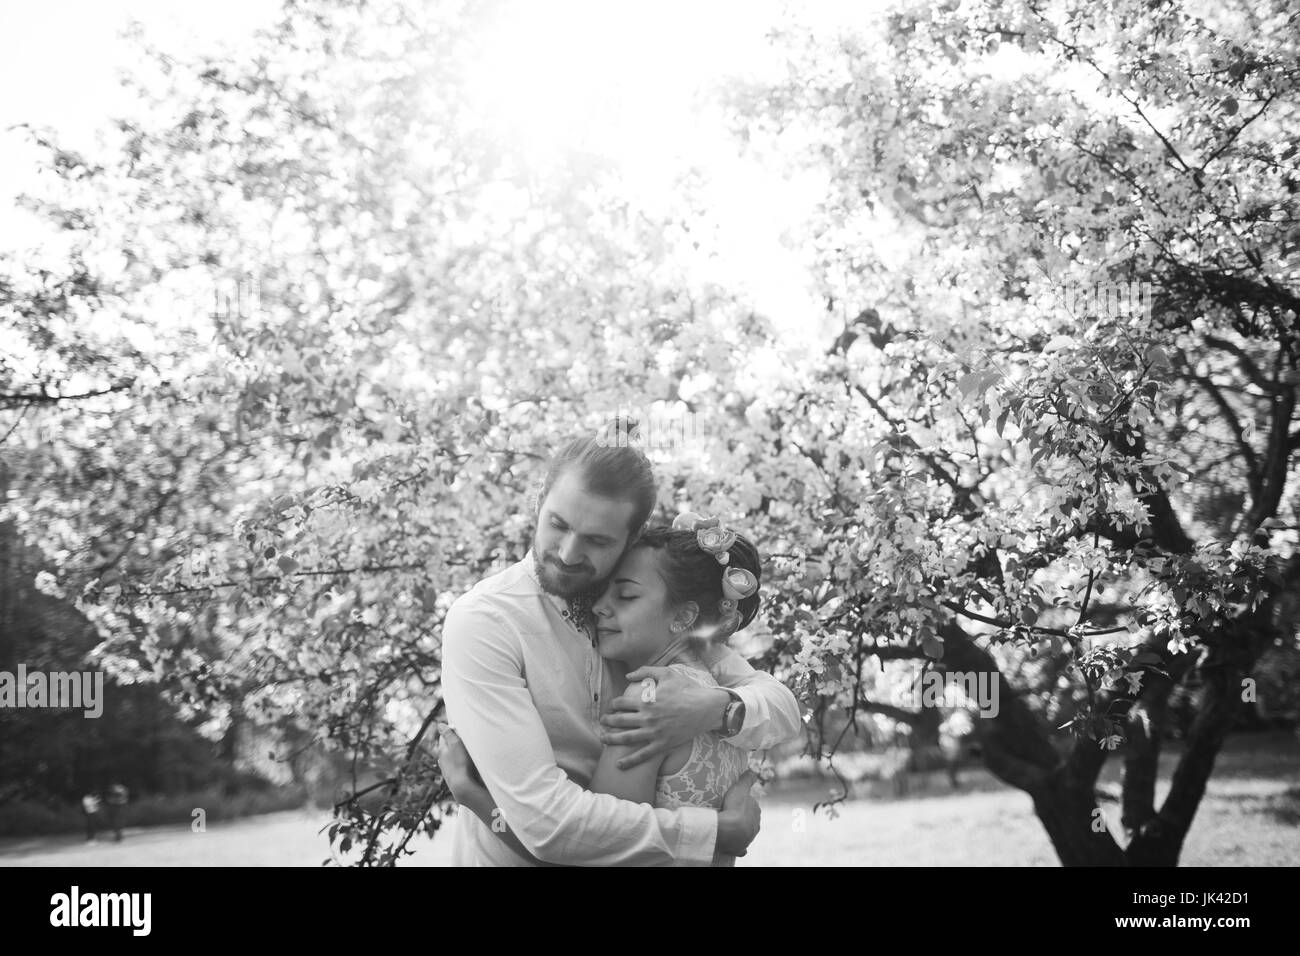 Middle Eastern couple hugging under flowering tree Stock Photo